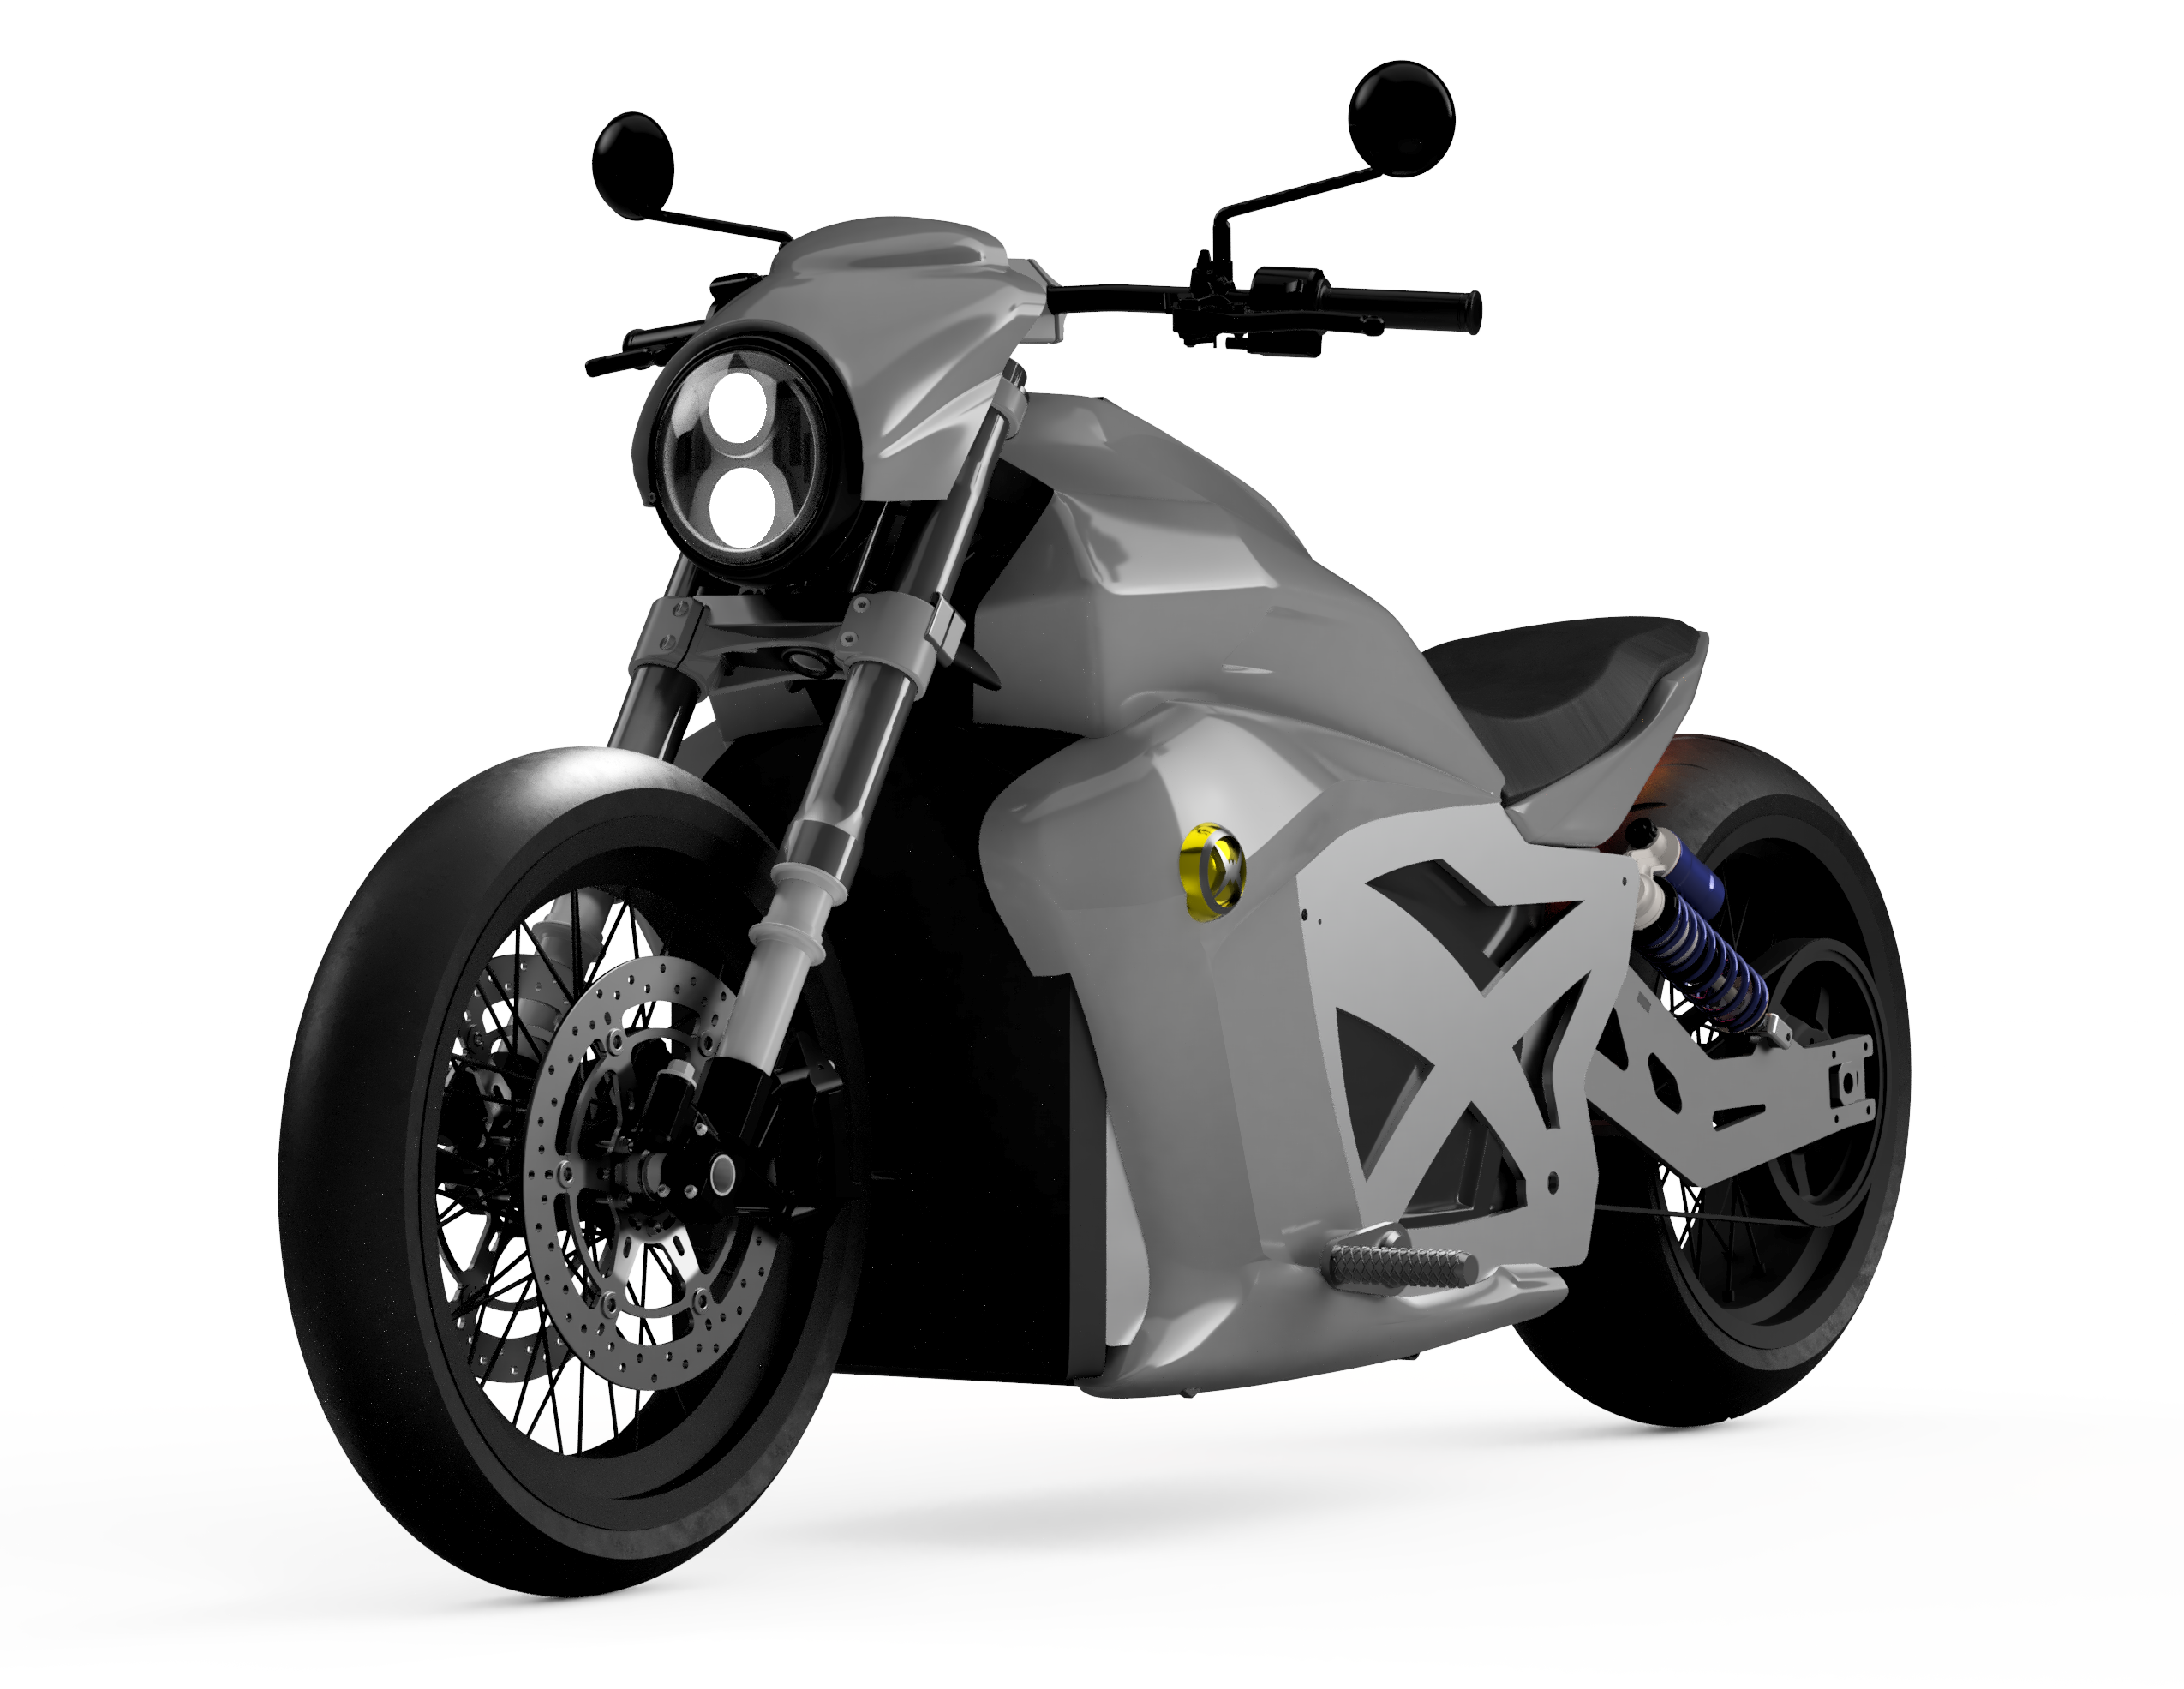 Evoke Motorcycles unveils new 120 kW electric cruiser design with 080